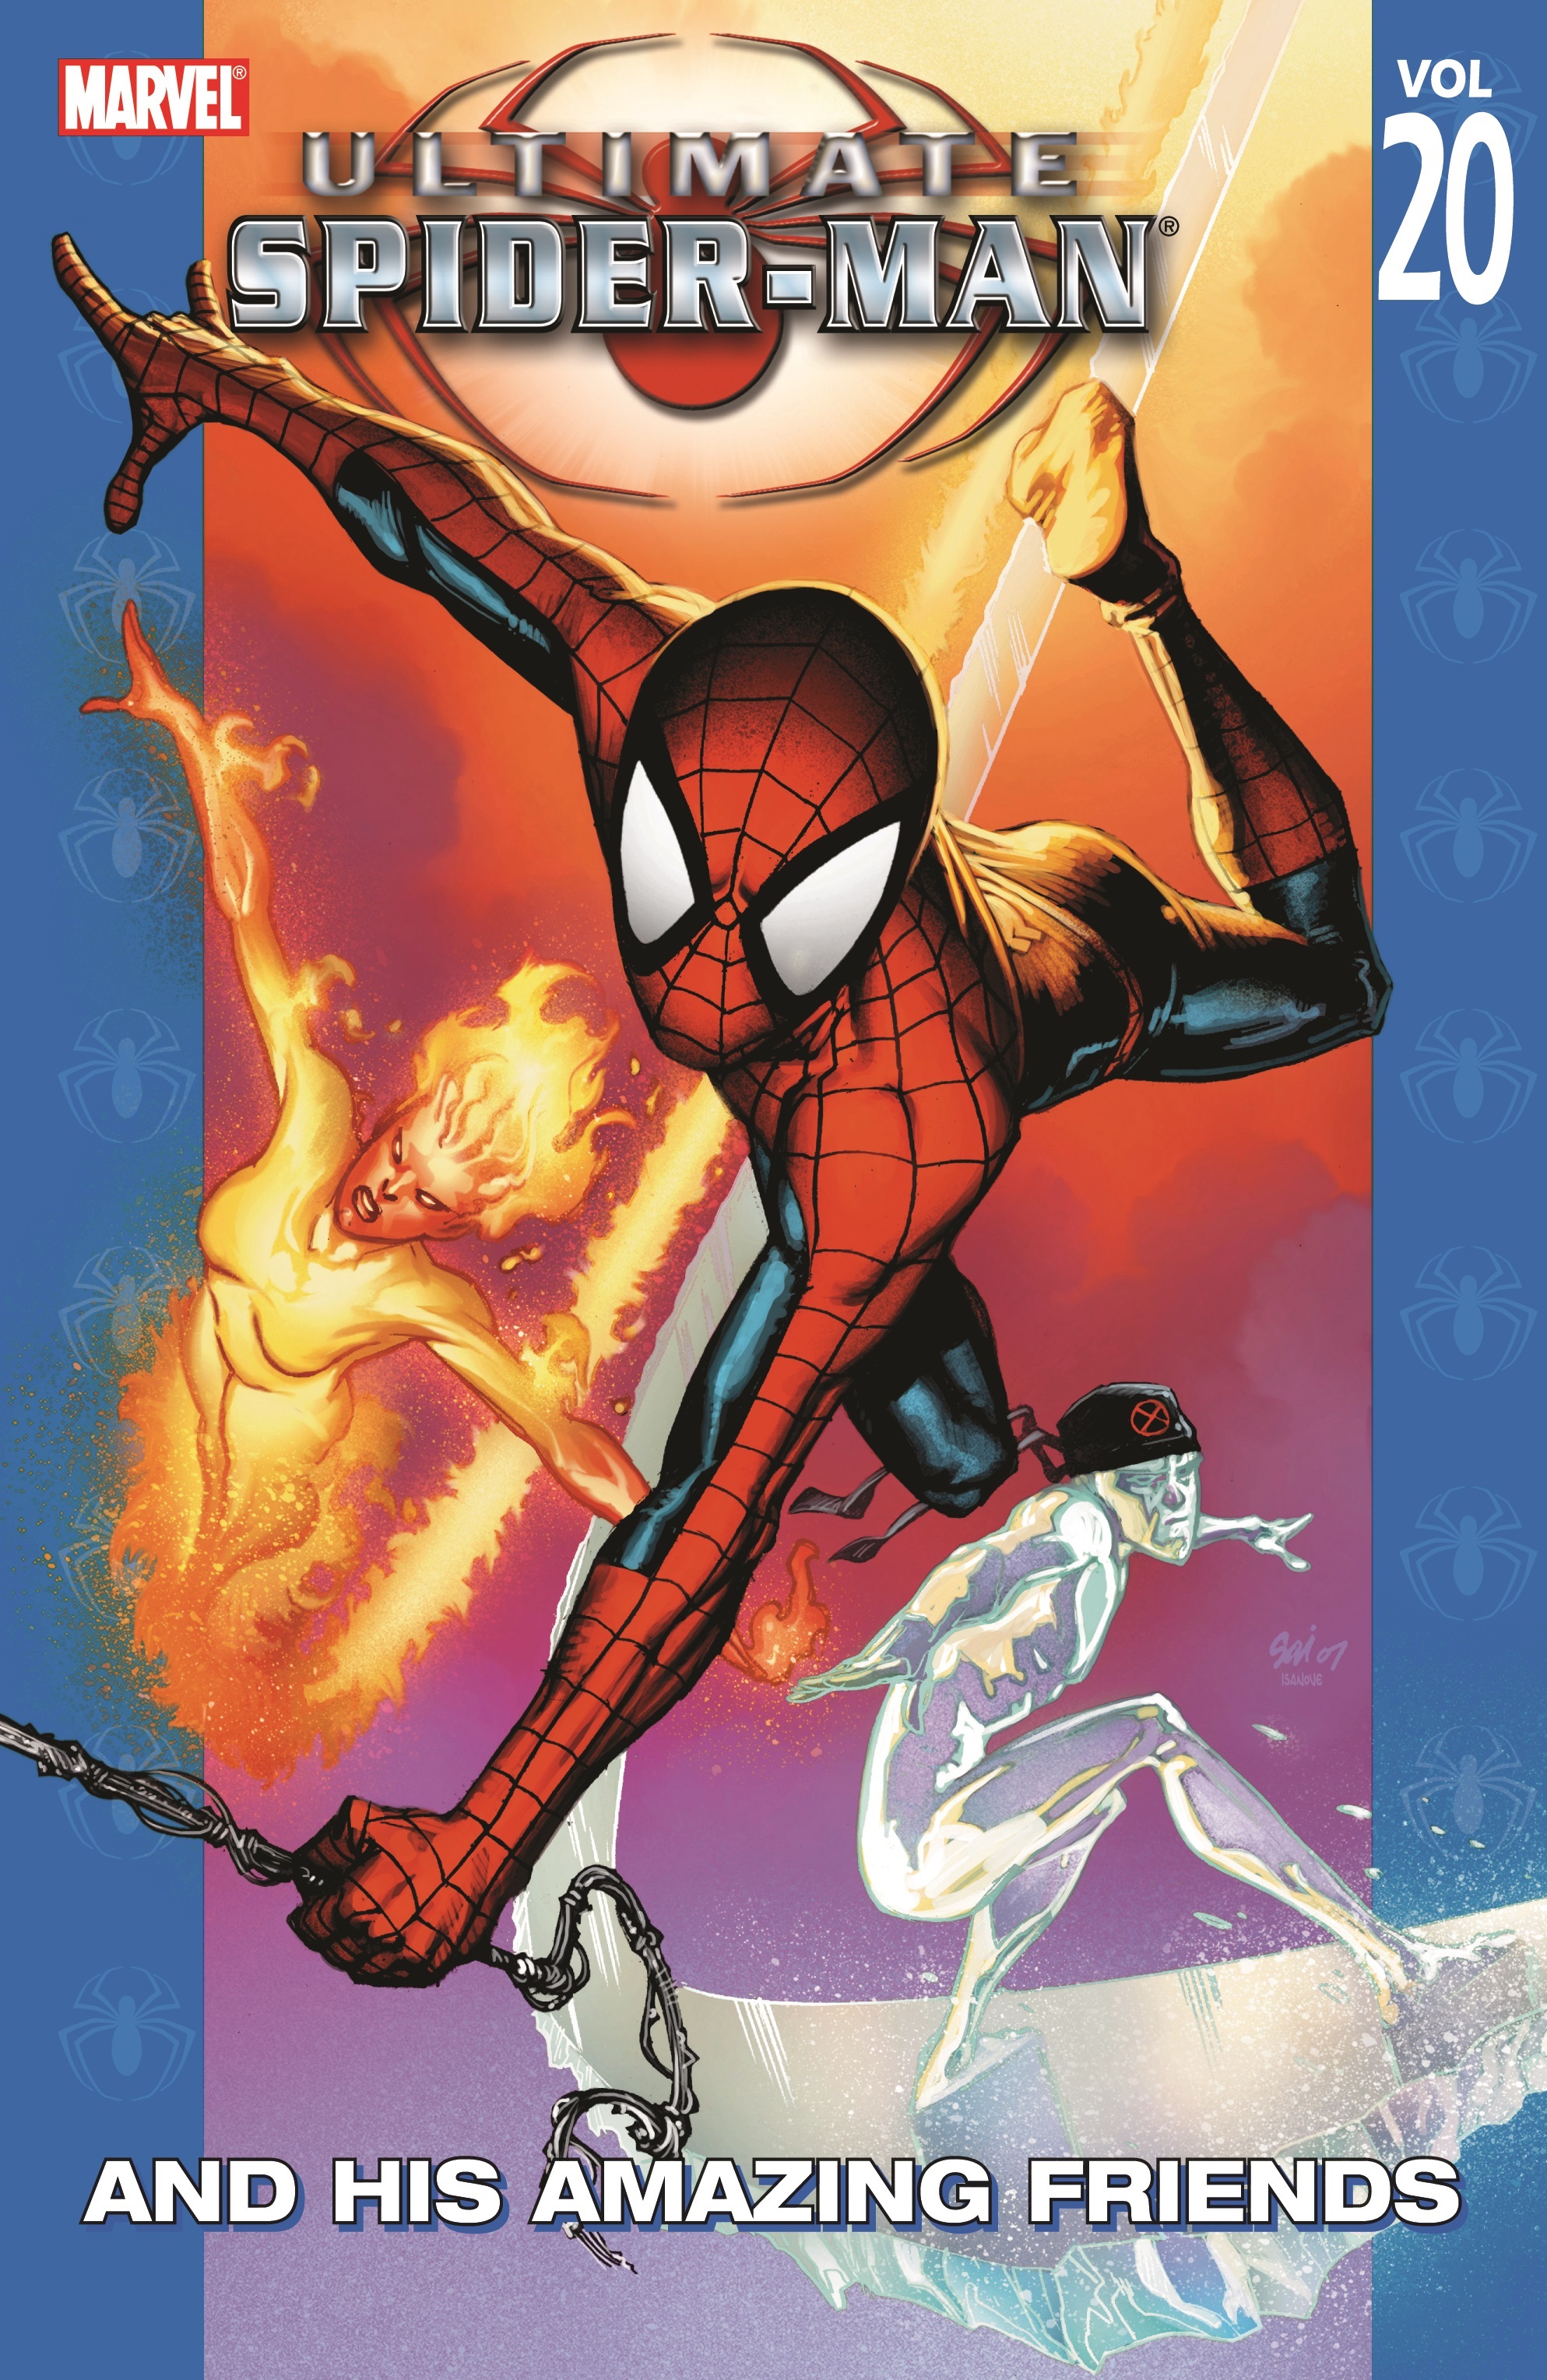 Ultimate Spider-Man Vol. 20: Ultimate Spider-Man and His Amazing Friends (Trade Paperback)